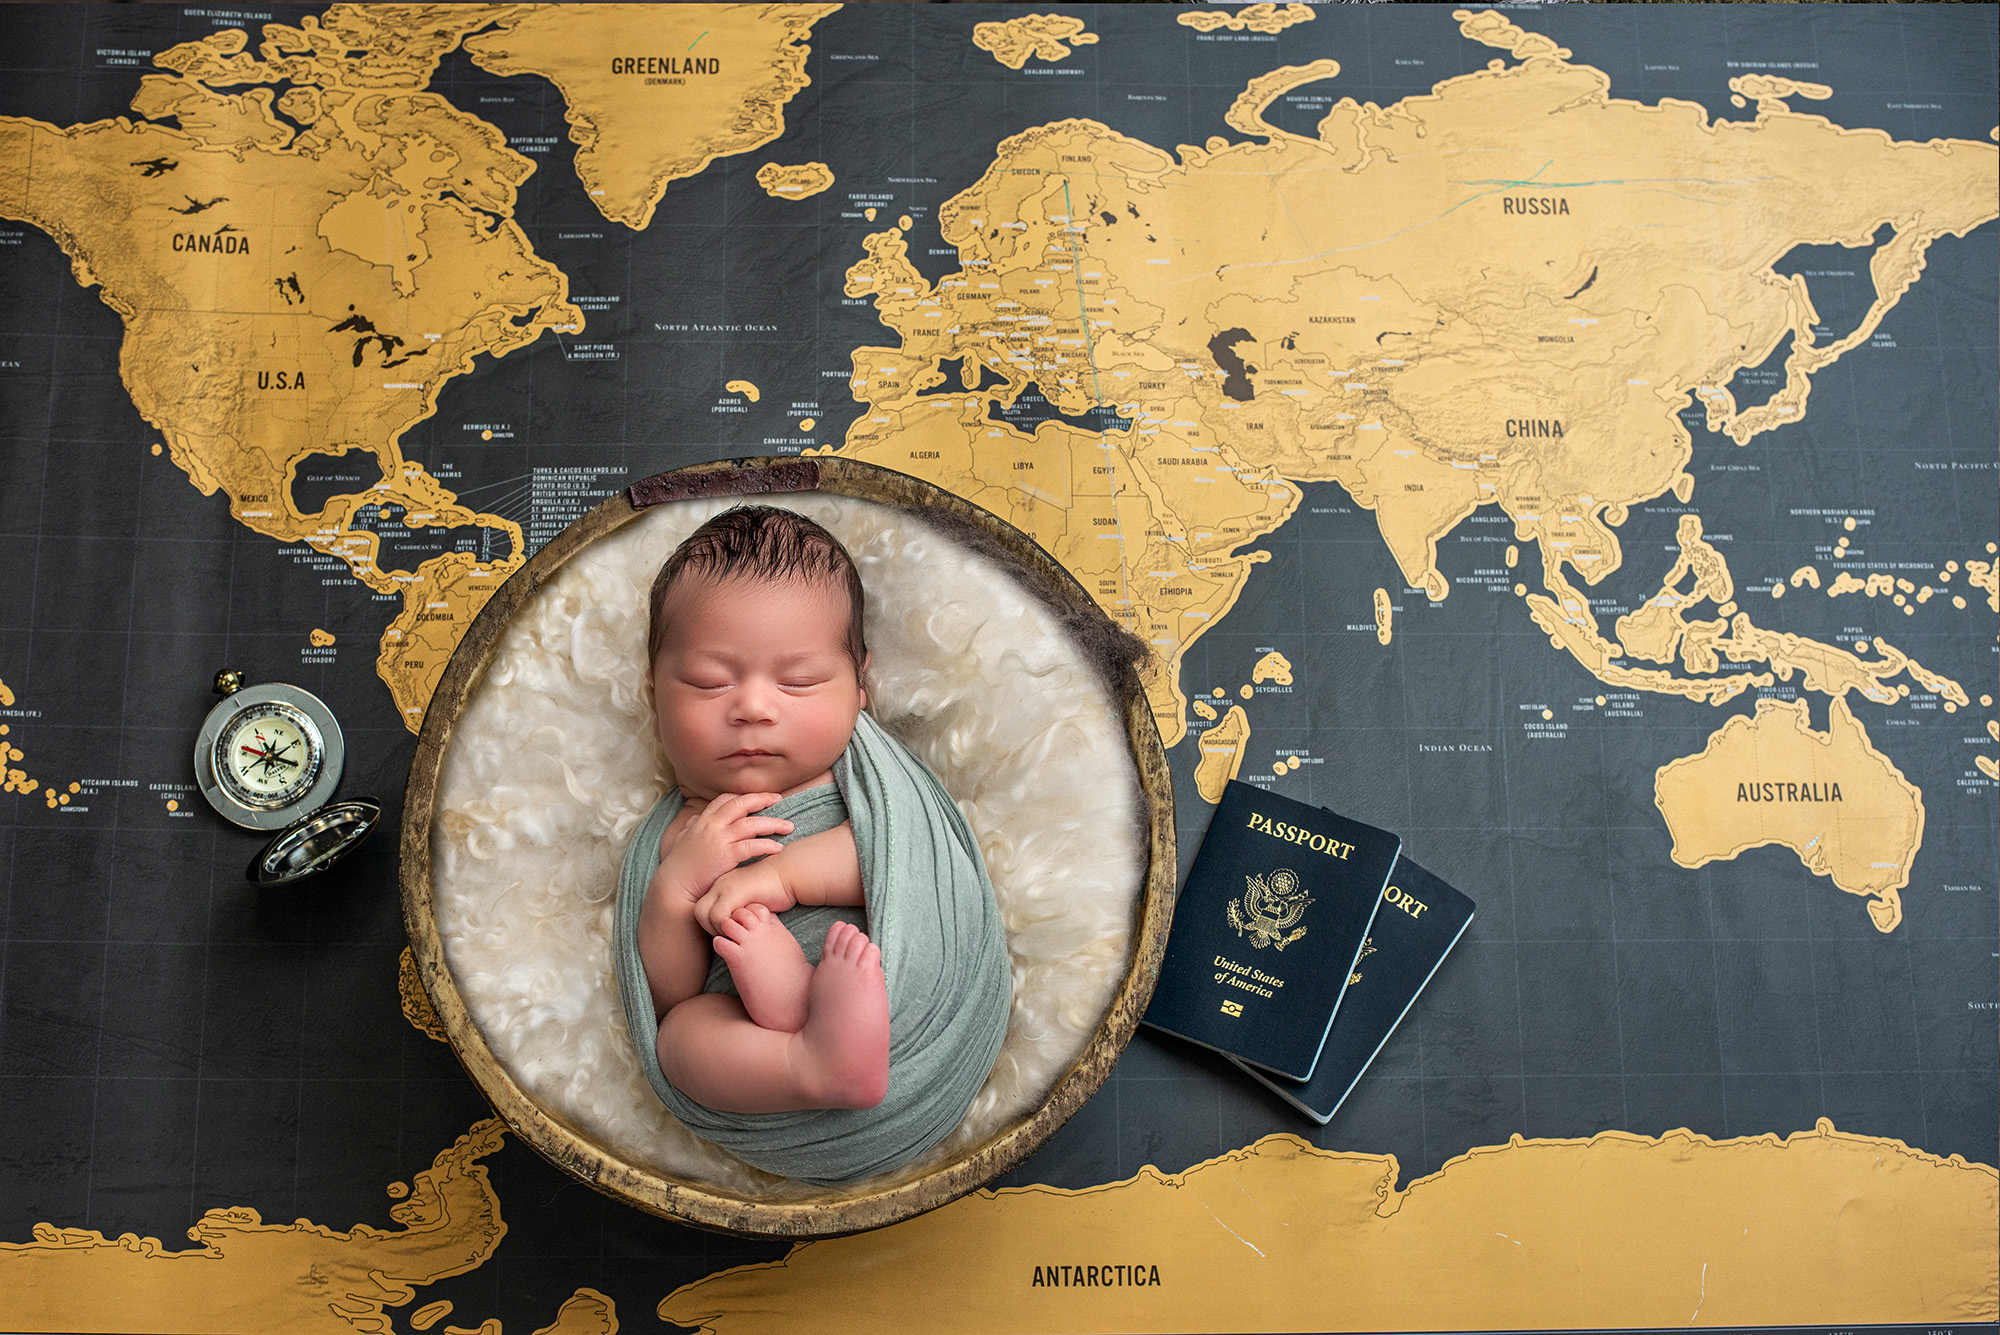 Newborn photos with Thai Culture newborn baby boy asleep in bowl surrounded by world map and passports